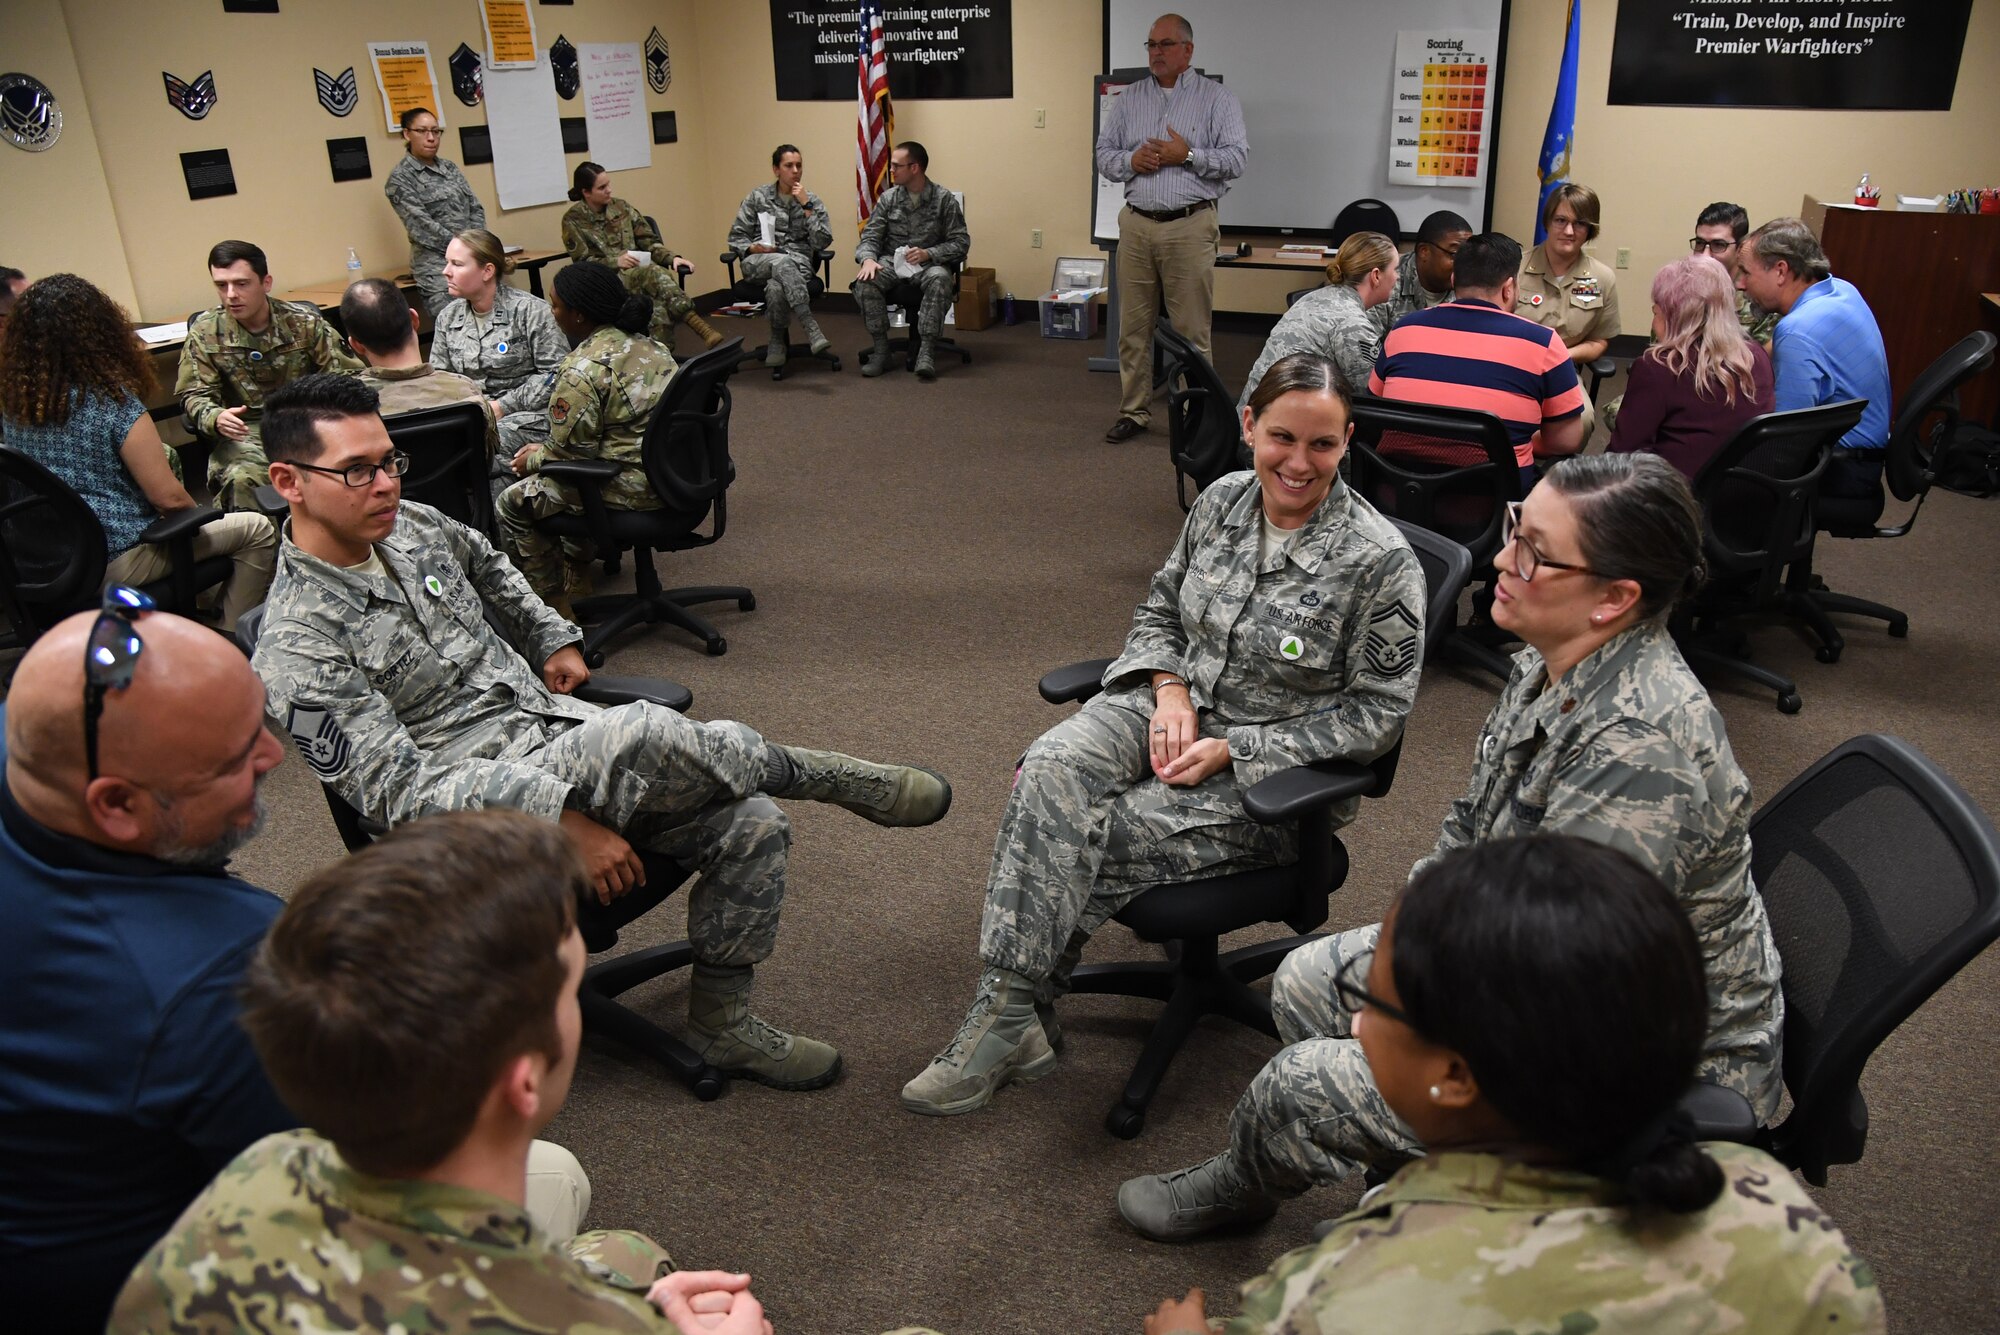 Keesler personnel participate in a "Star Power" exercise during the Leadership Enhancement and Development Seminar inside the Airman Leadership School building at Keesler Air Force Base, Mississippi, Nov. 5, 2019. The three-day course, which is open to all supervisors, is meant to enhance effective communication, skillful interpersonal interaction and emotional intelligence in the military environment by using an active learning format that emphasizes discussion and minimizes lecture. (U.S. Air Force photo by Kemberly Groue)